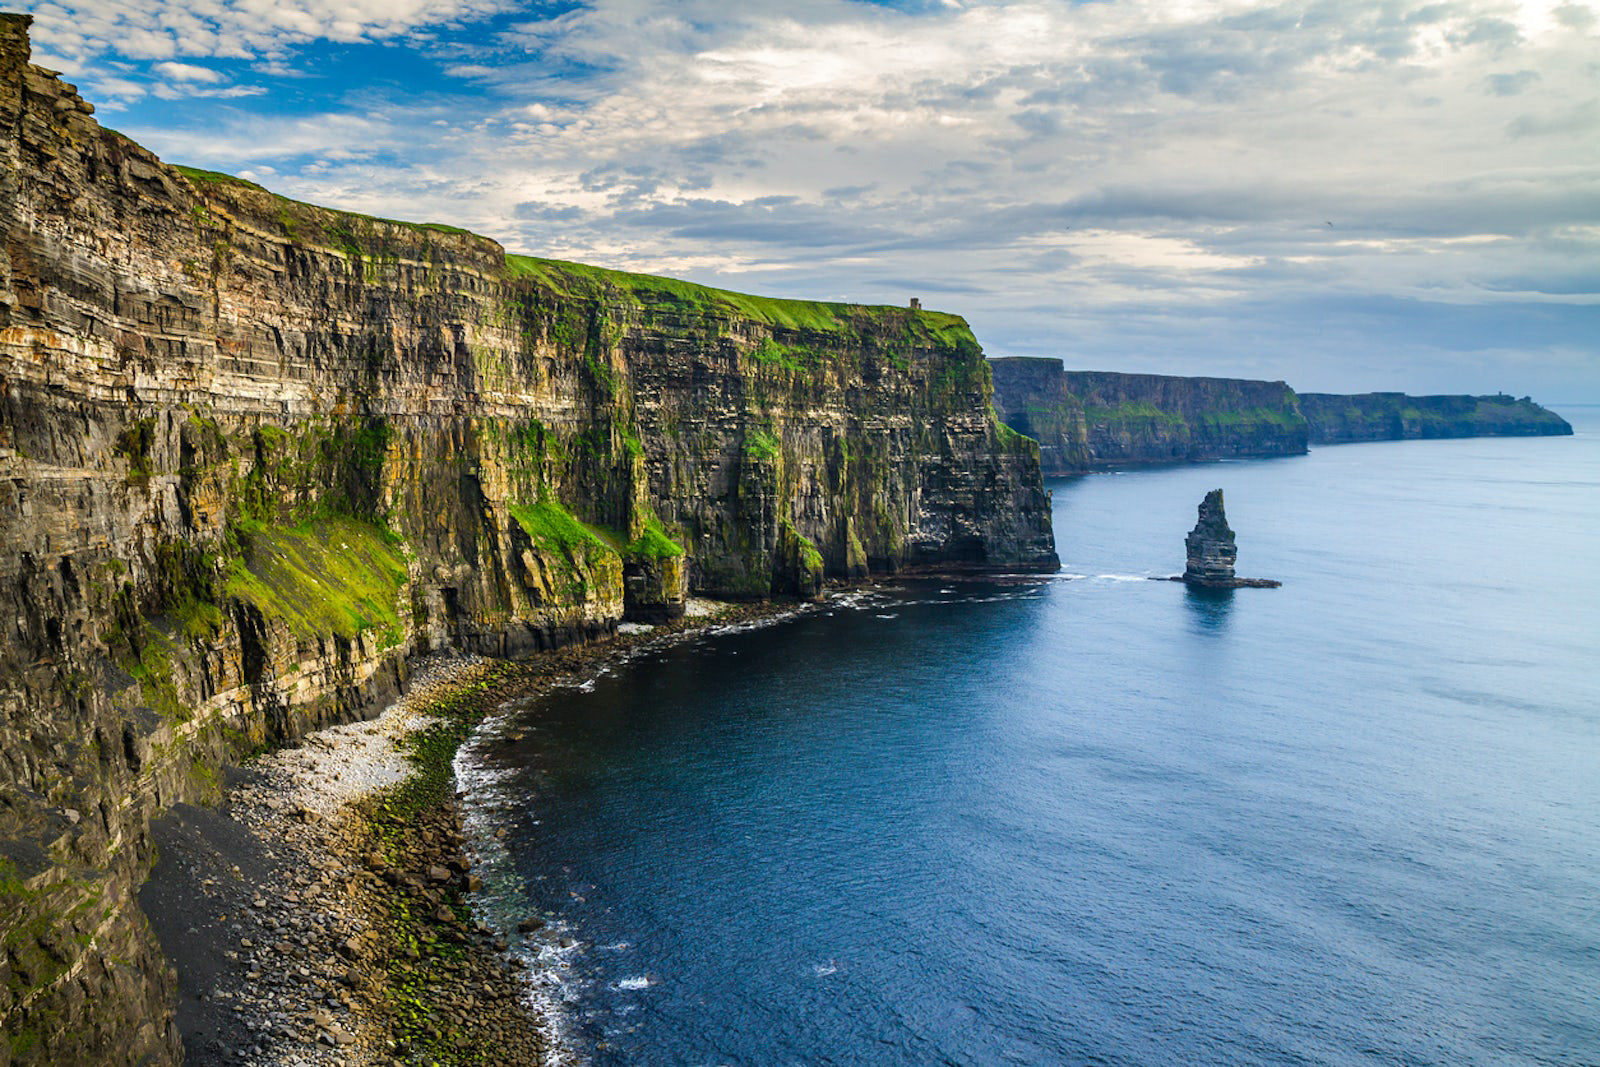 The magical cliffs of moher